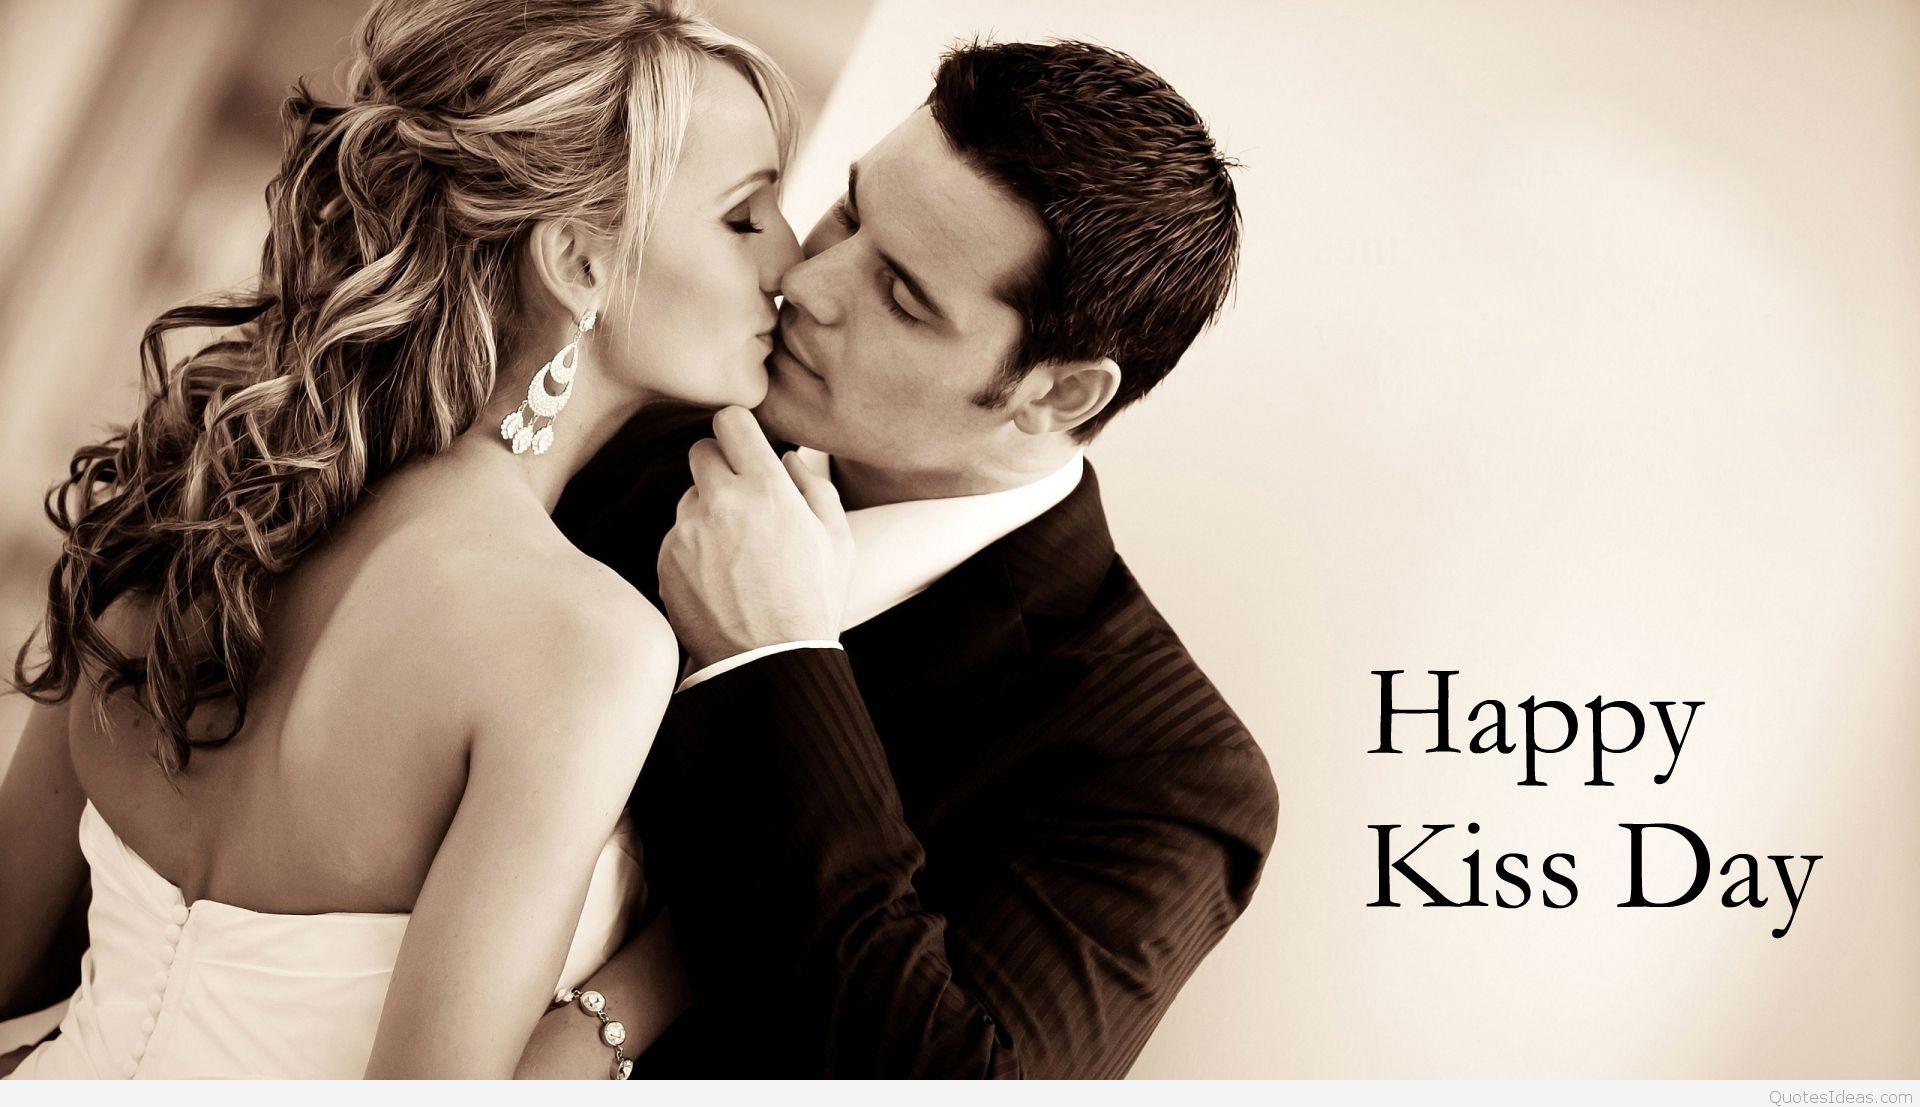 Happy Kiss Day Valentine's day wishes, quotes and wallpaper